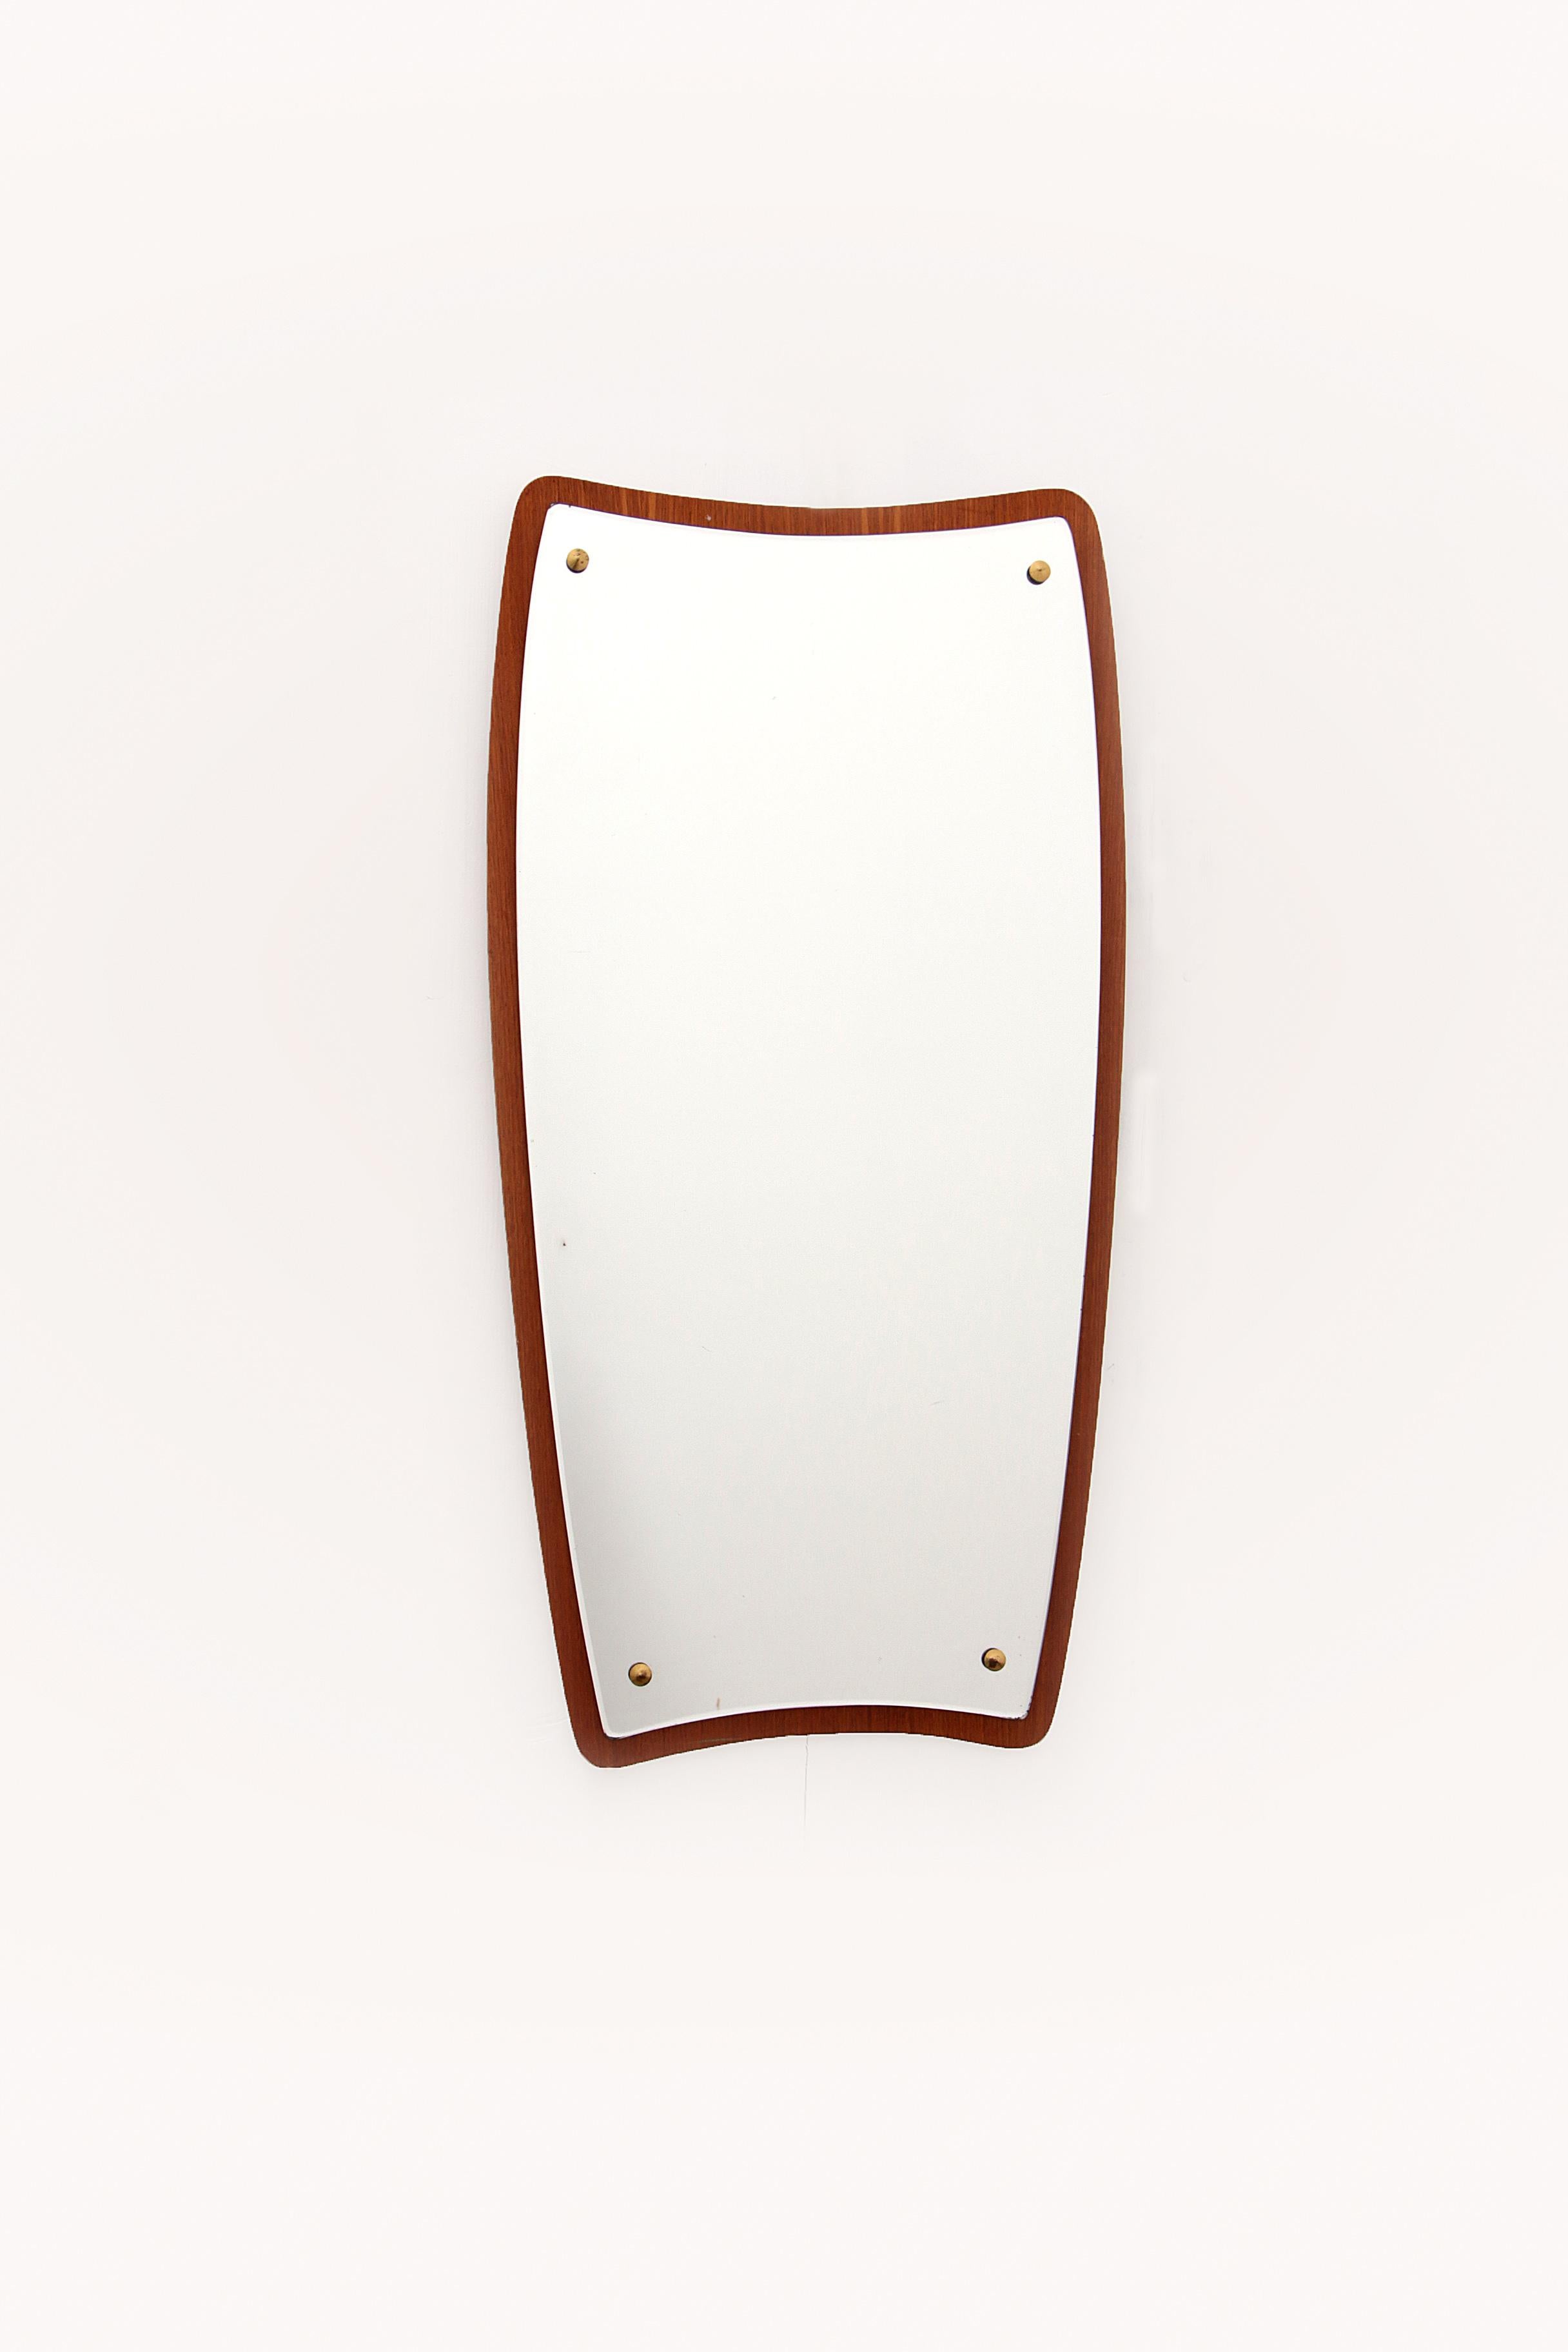 This is a beautiful large hanging mirror that has always been used in the hall. Made in Denmark around the 1960s

The mirror is attached to a beautiful teak bottom plate with decorative screws.

Sustainable: environmentally conscious By